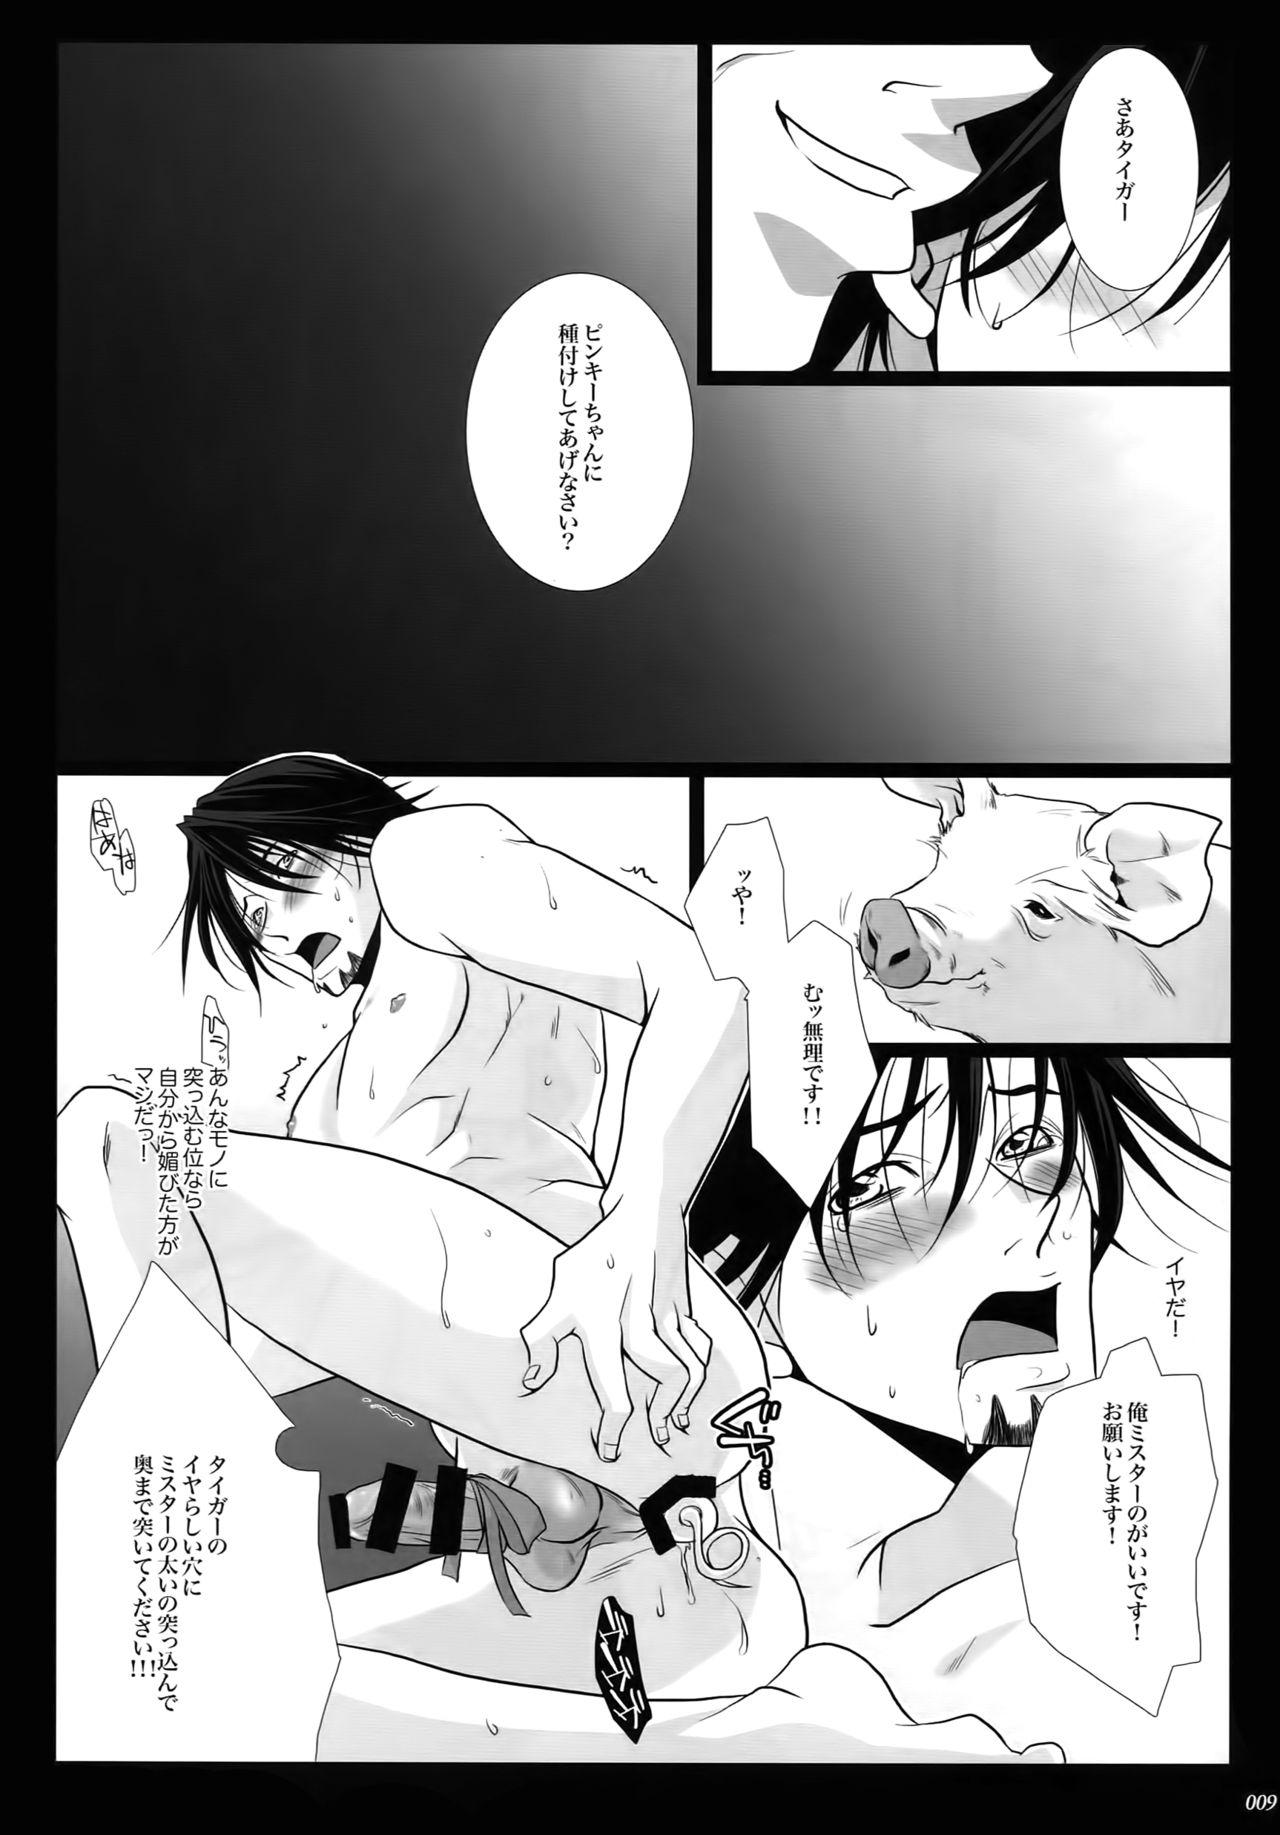 Nylon mob;Re - Tiger and bunny White Chick - Page 8